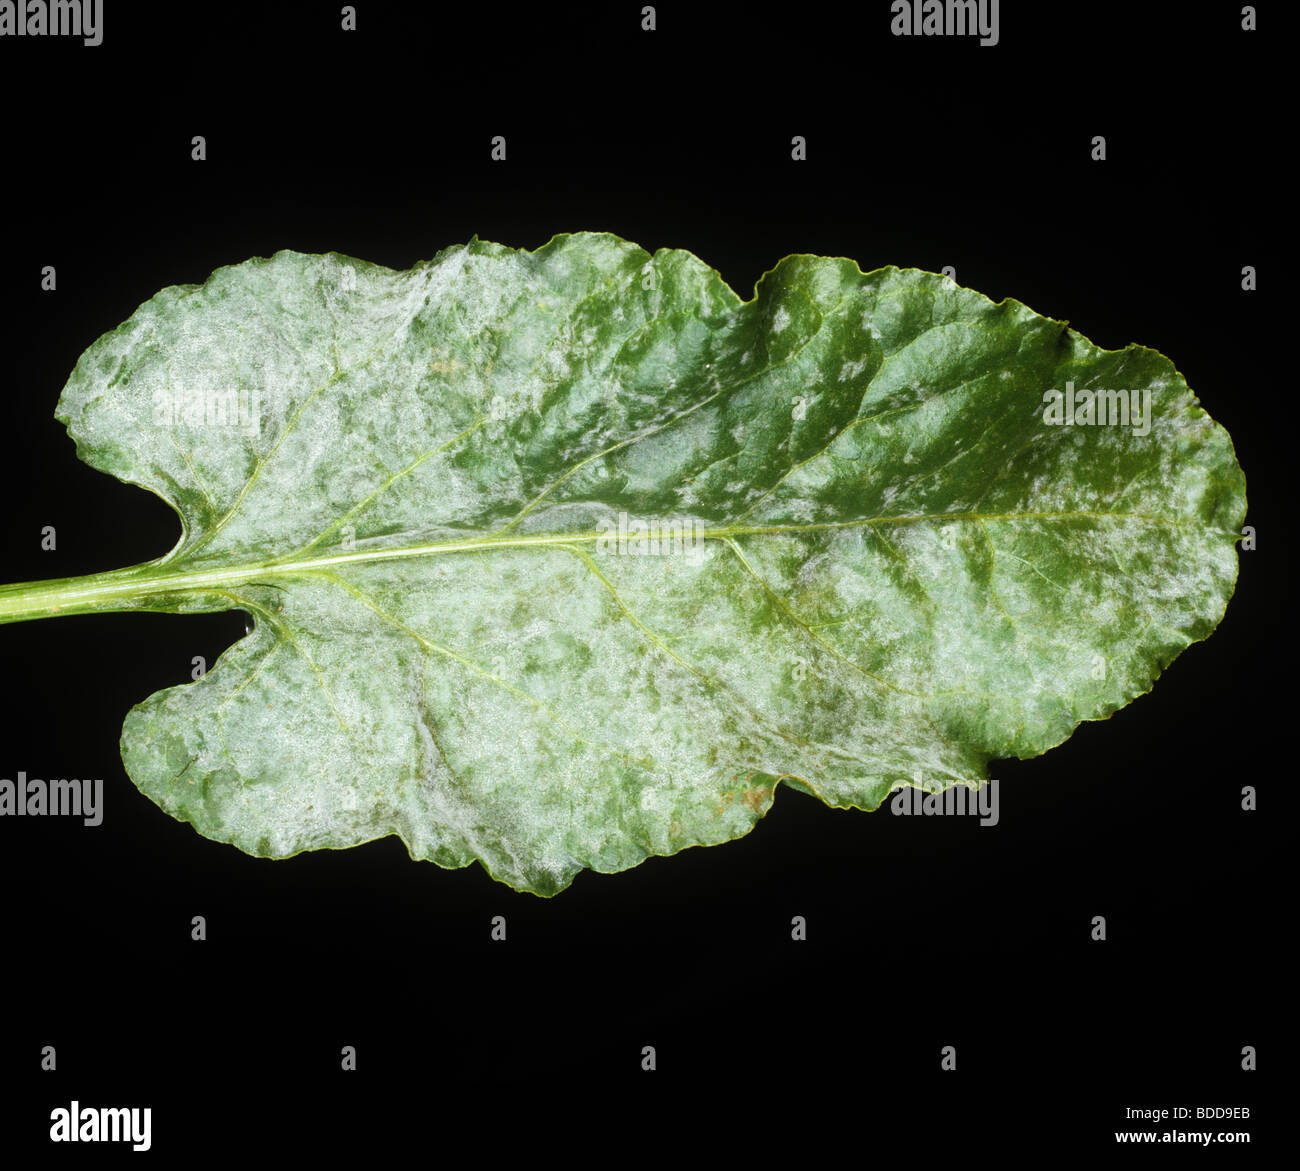 Powdery mildew (Erysiphe betae) infection on a sugar beet leafet Stock Photo